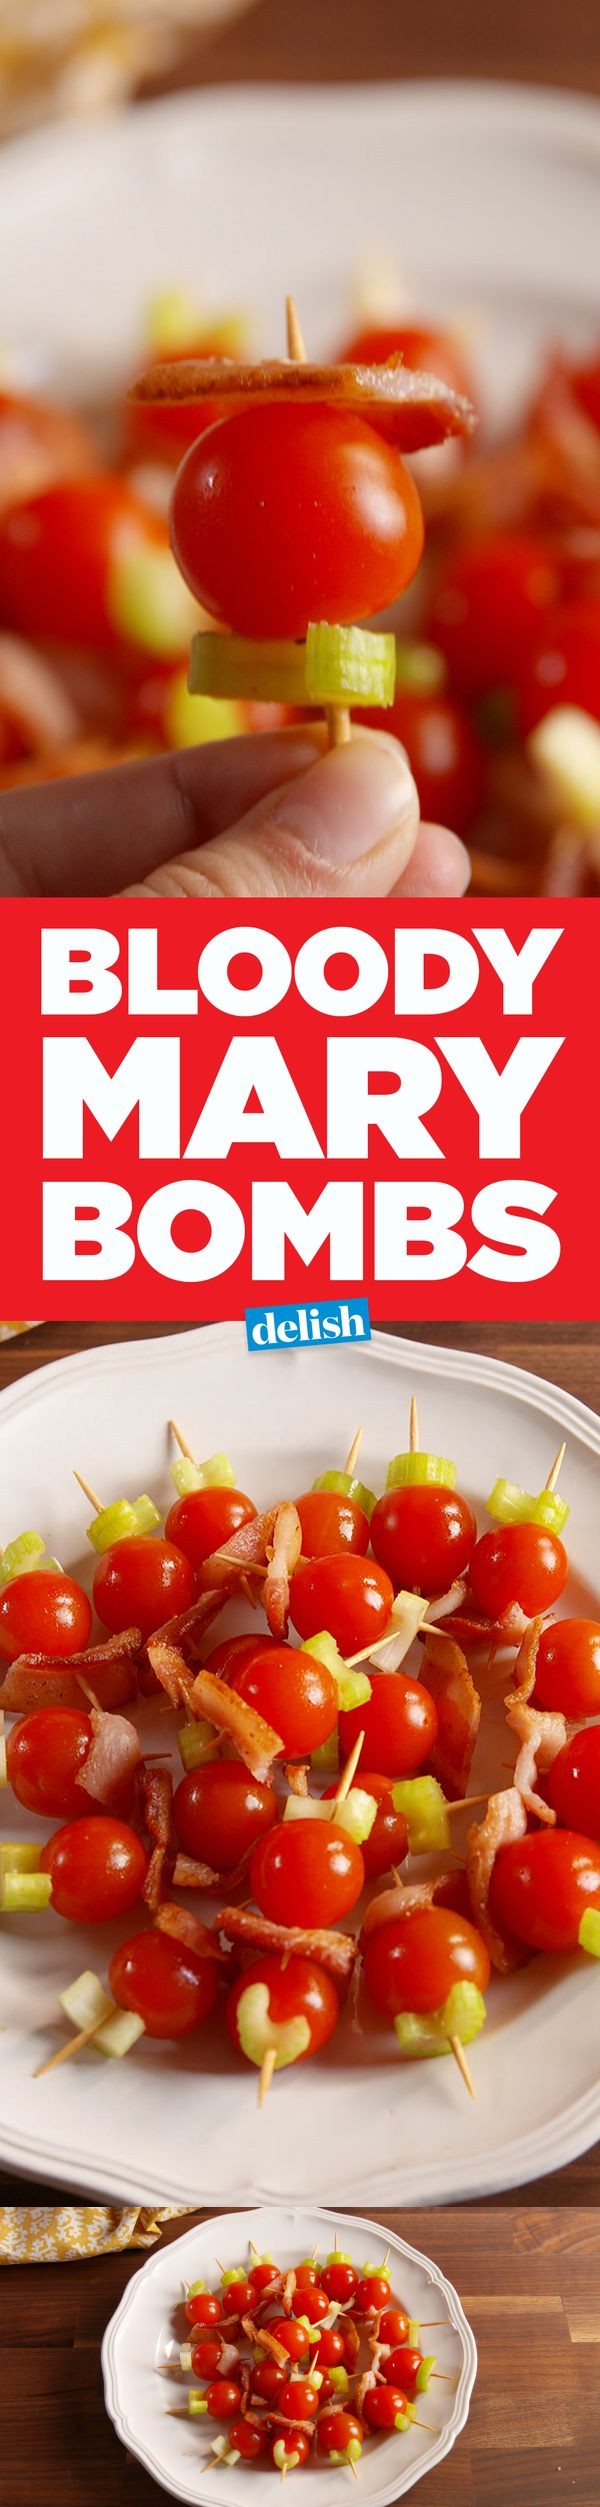 Bloody Mary Bombs